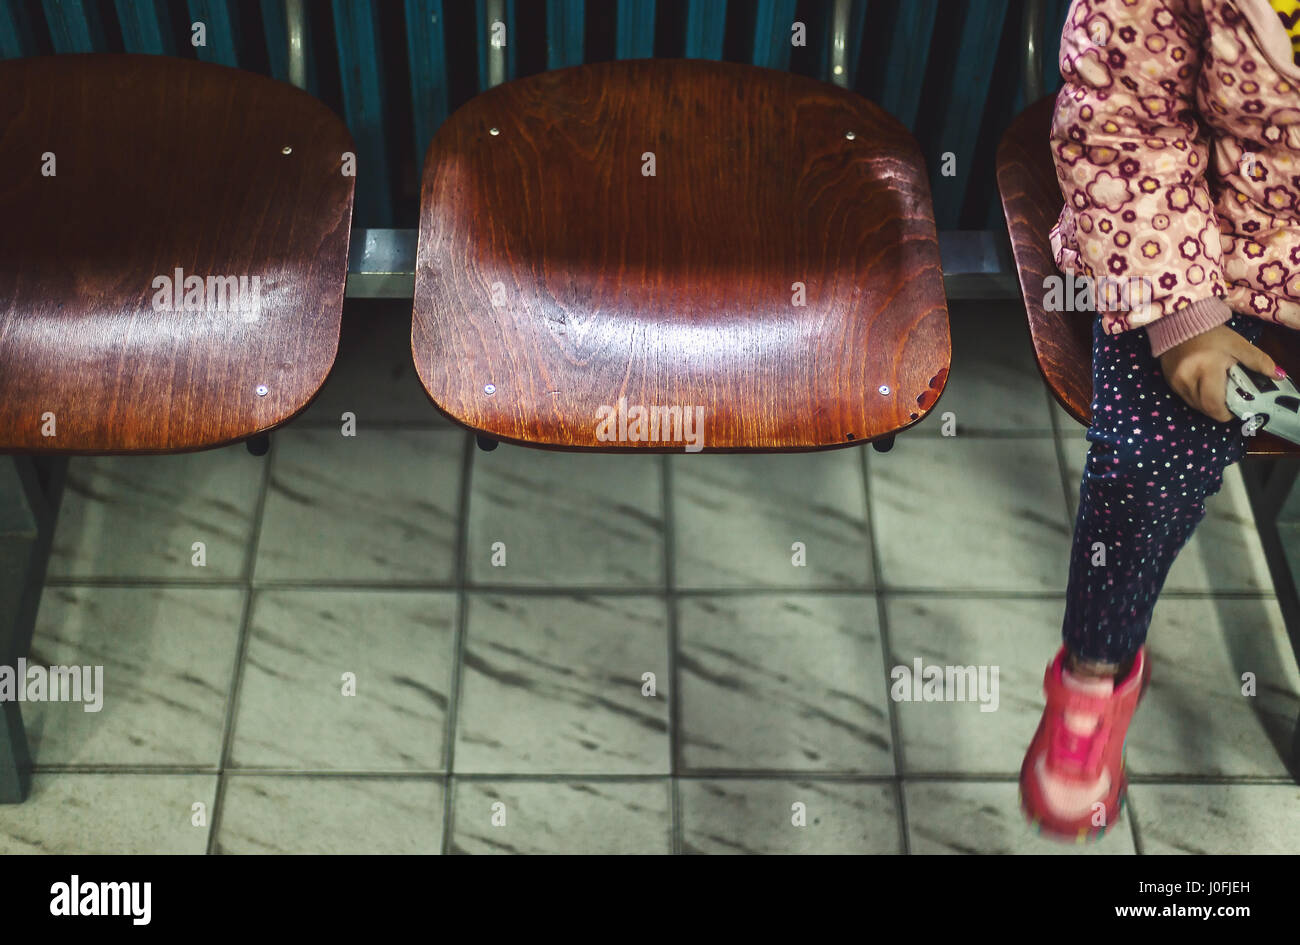 Three wooden chairs in waiting room and part of a body of a small child sitting and waiting. Stock Photo